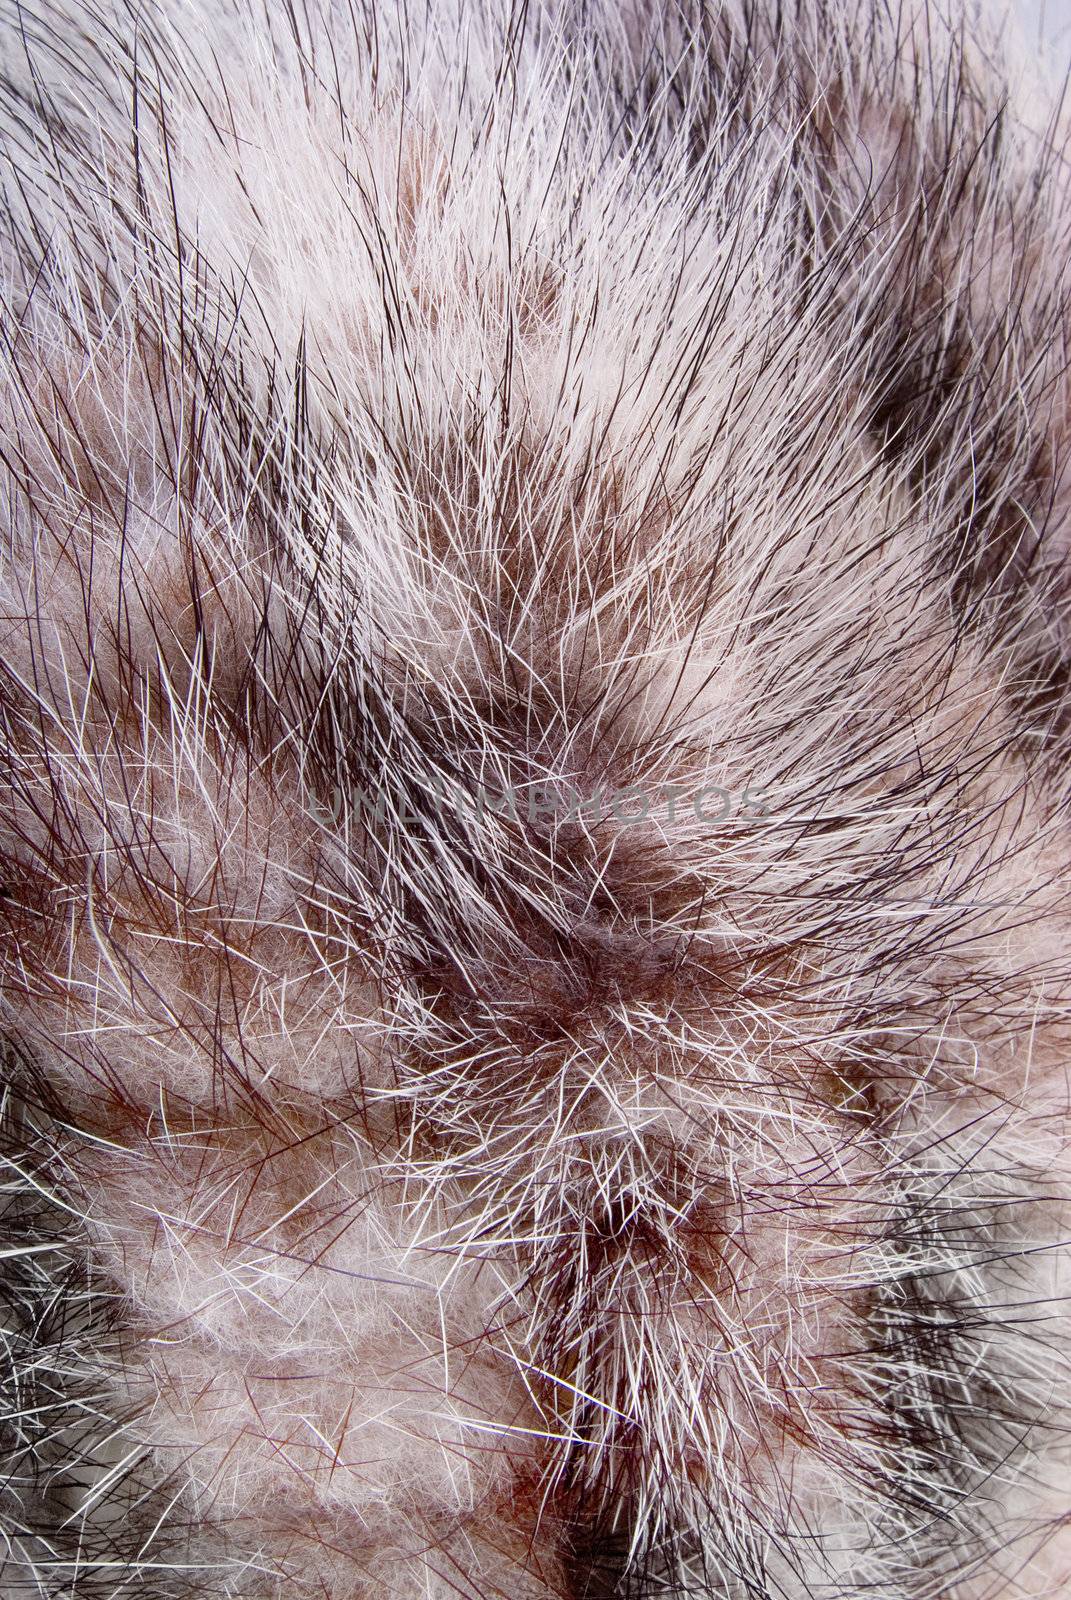 Background of fur for collages or other works of art